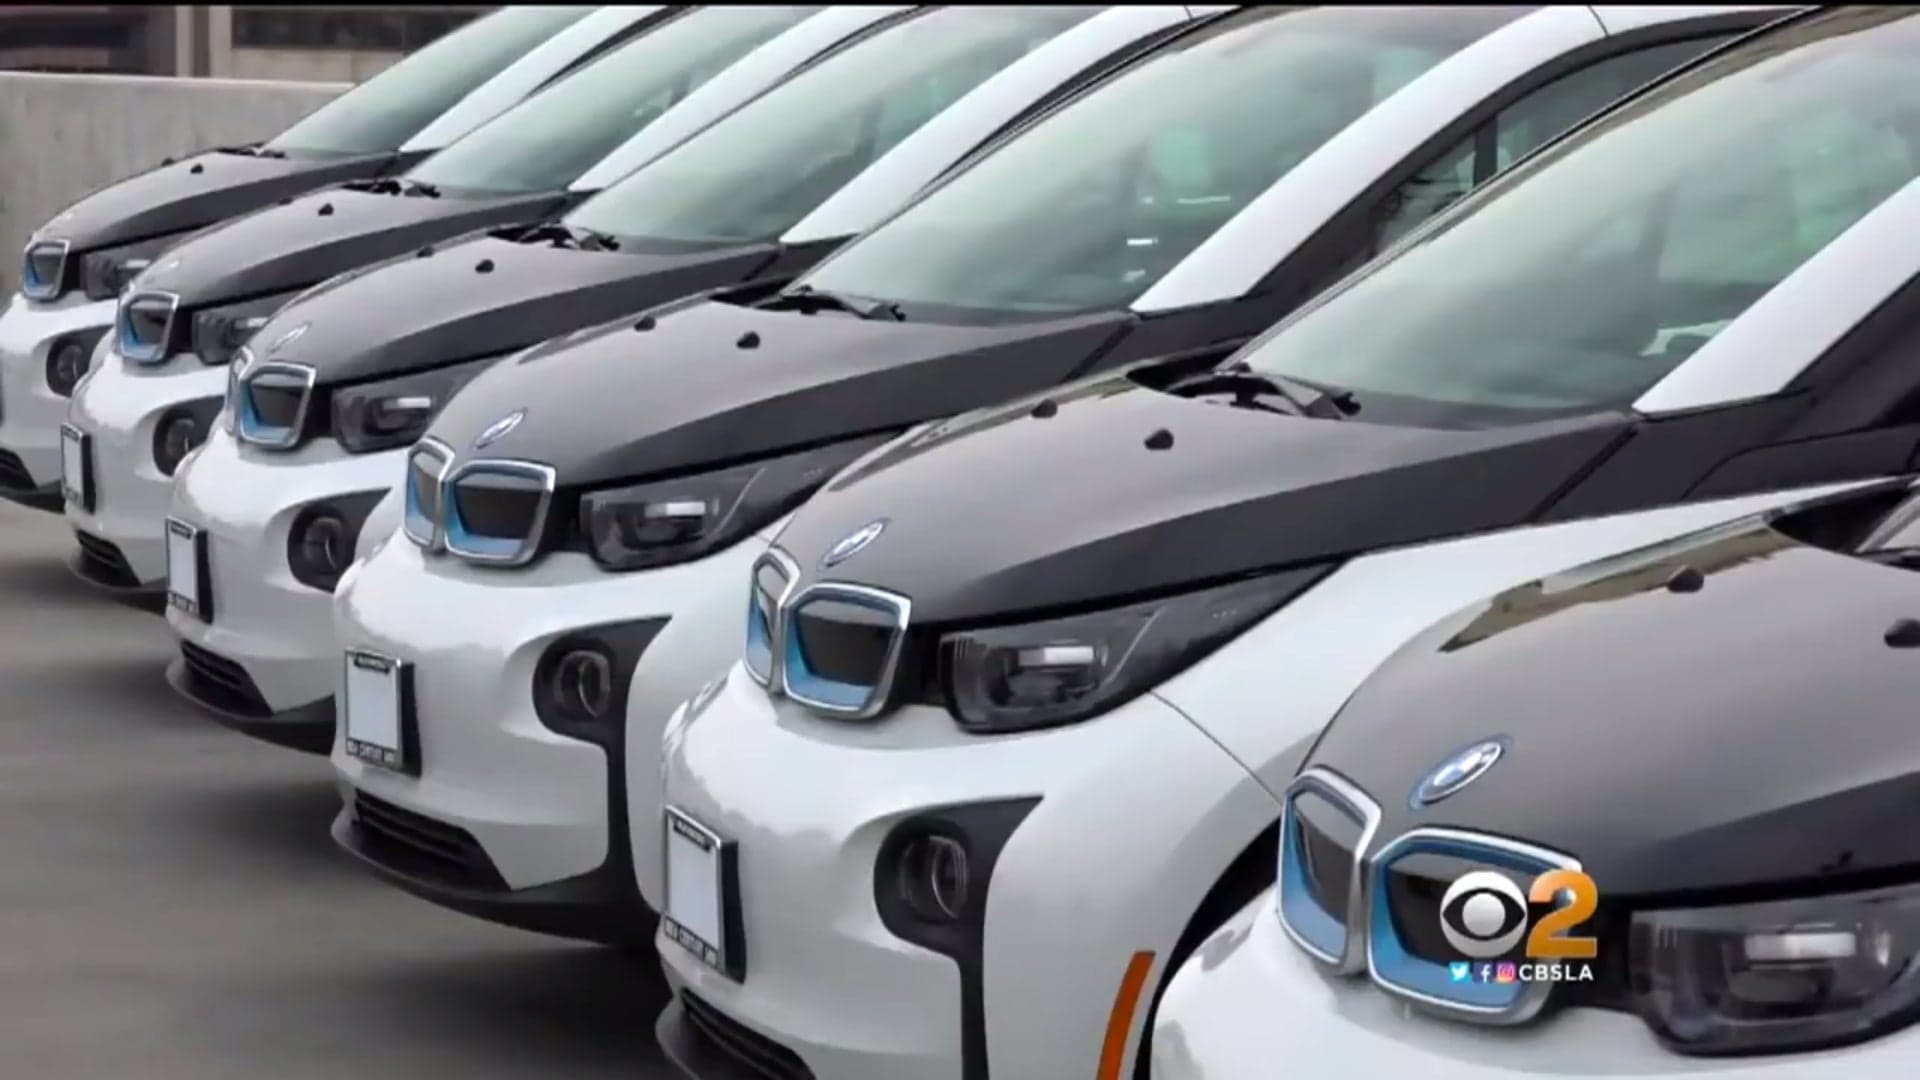 LAPD’s BMW i3s Are Either Being Misused or Not Used at All